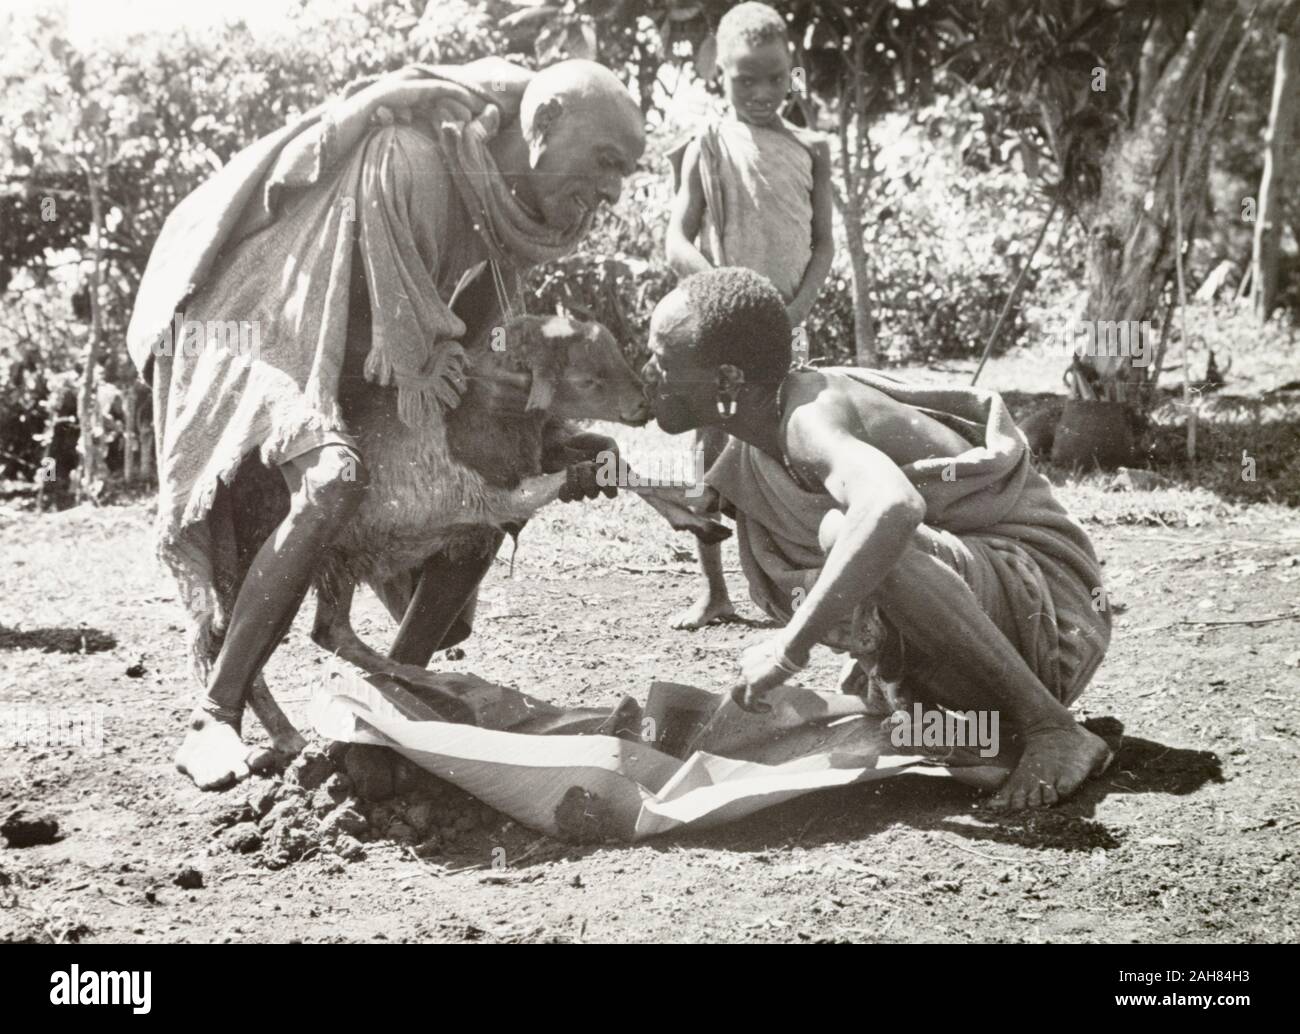 Kenya, A Kikuyu man takes part in a purification ceremony, drinking a concoction from the nose of a sacrificed goat. It is administered by a 'Mundu mugu' (magic man), and either spat or vomited out to cleanse the perpetrator of their sins. Original manuscript caption: Purification ceremony, S. Nyeri, 1936Mundu mugu standing. 1936. Supplicant drinking a concoction made from various herbs & minerals, & the undigested contents of a goats stomach, from the nose of the dead goat, 1937. 1995/076/1/2/5/32. Stock Photo